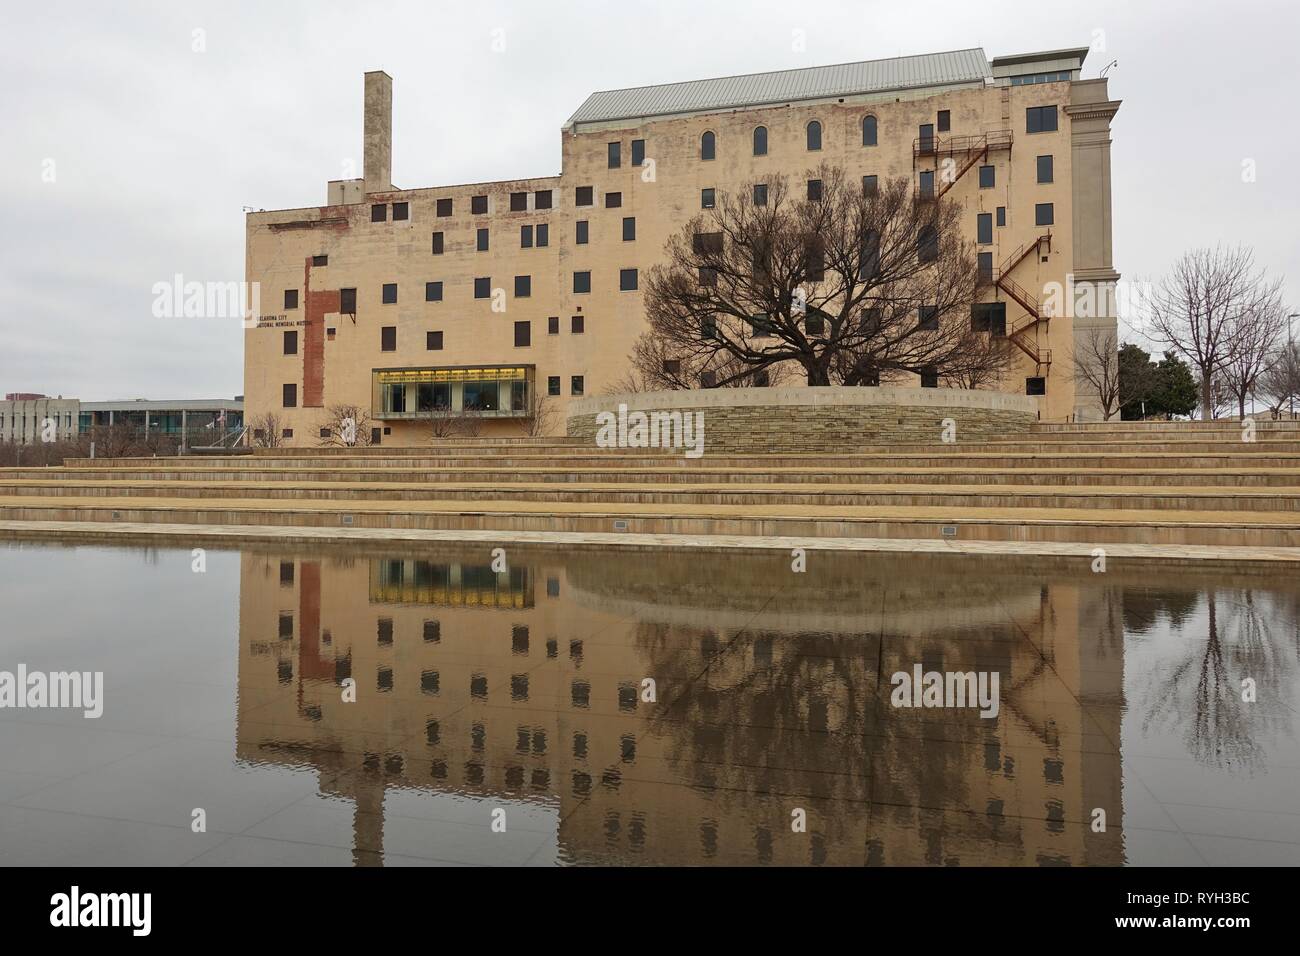 OKLAHOMA CITY, OK -2 MAR 2019- View of the Oklahoma City National Memorial located on the former site of the Alfred P. Murrah Federal Building destroy Stock Photo